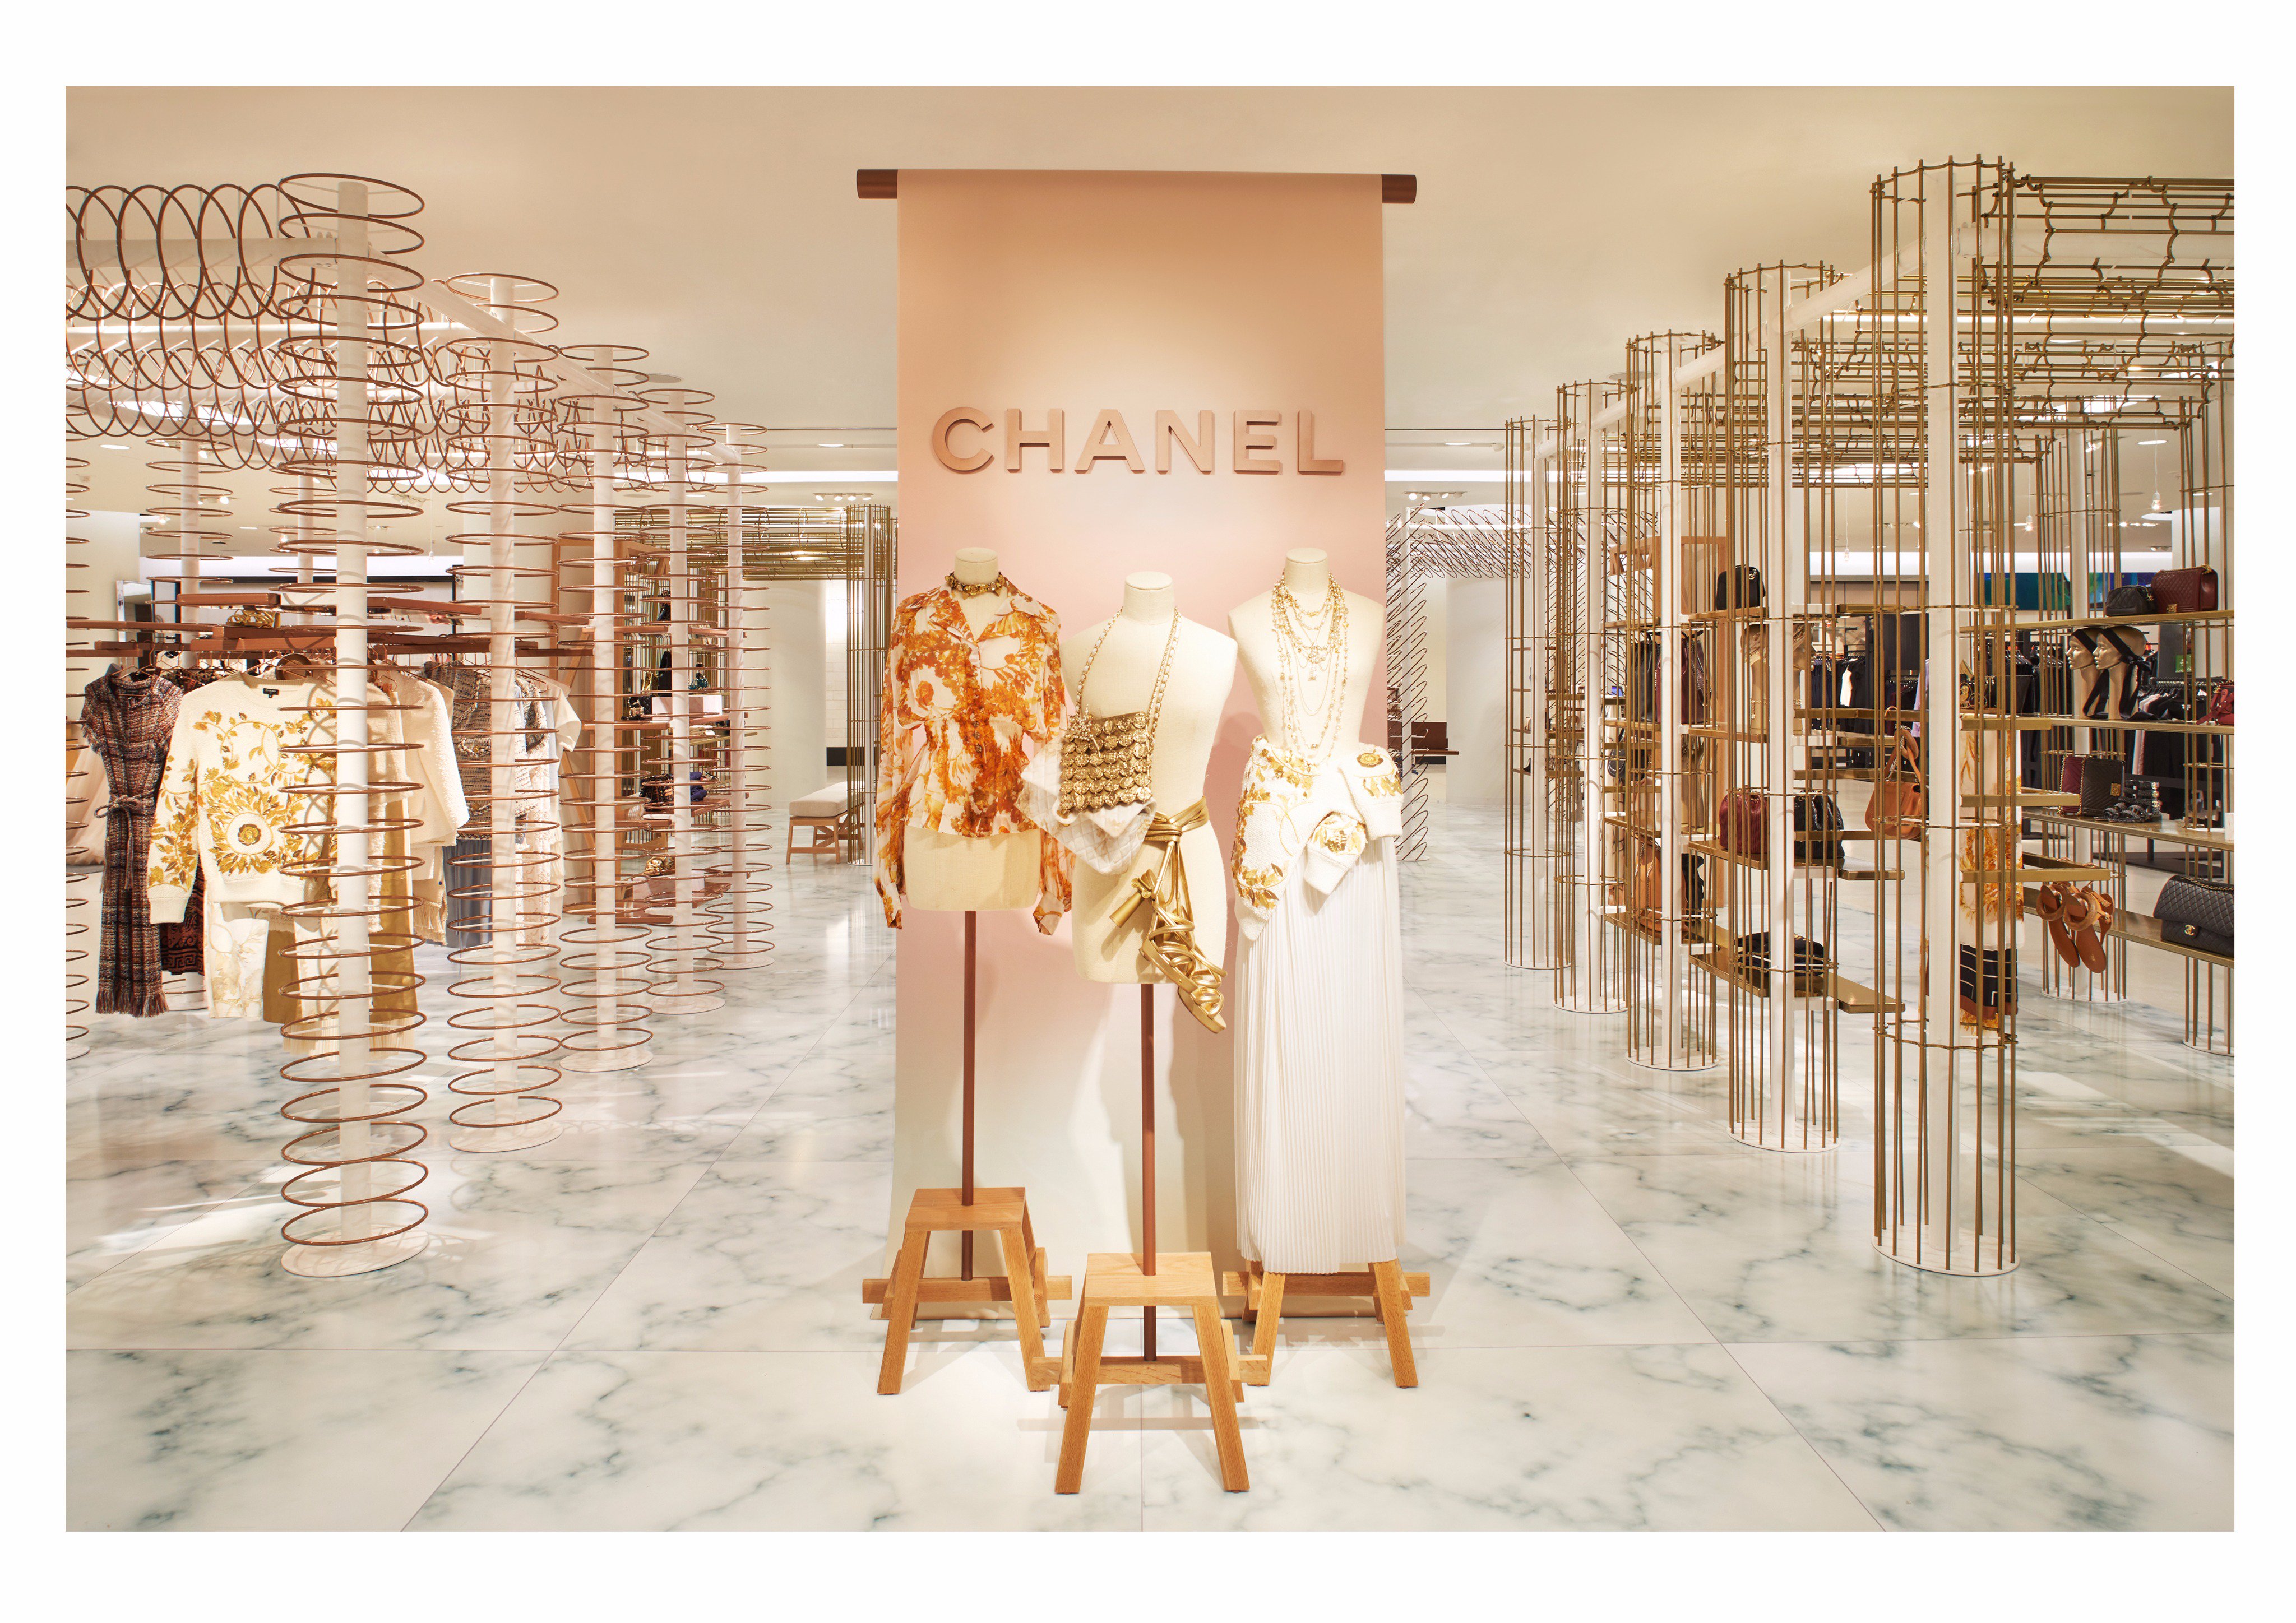 Nordstrom on Twitter: "We've partnered with @CHANEL to bring an exclusive CHANEL x Nordstrom Ephemeral Boutique to our #Seattle Flagship. Open to the public Nov 29 - Dec 10, the boutique